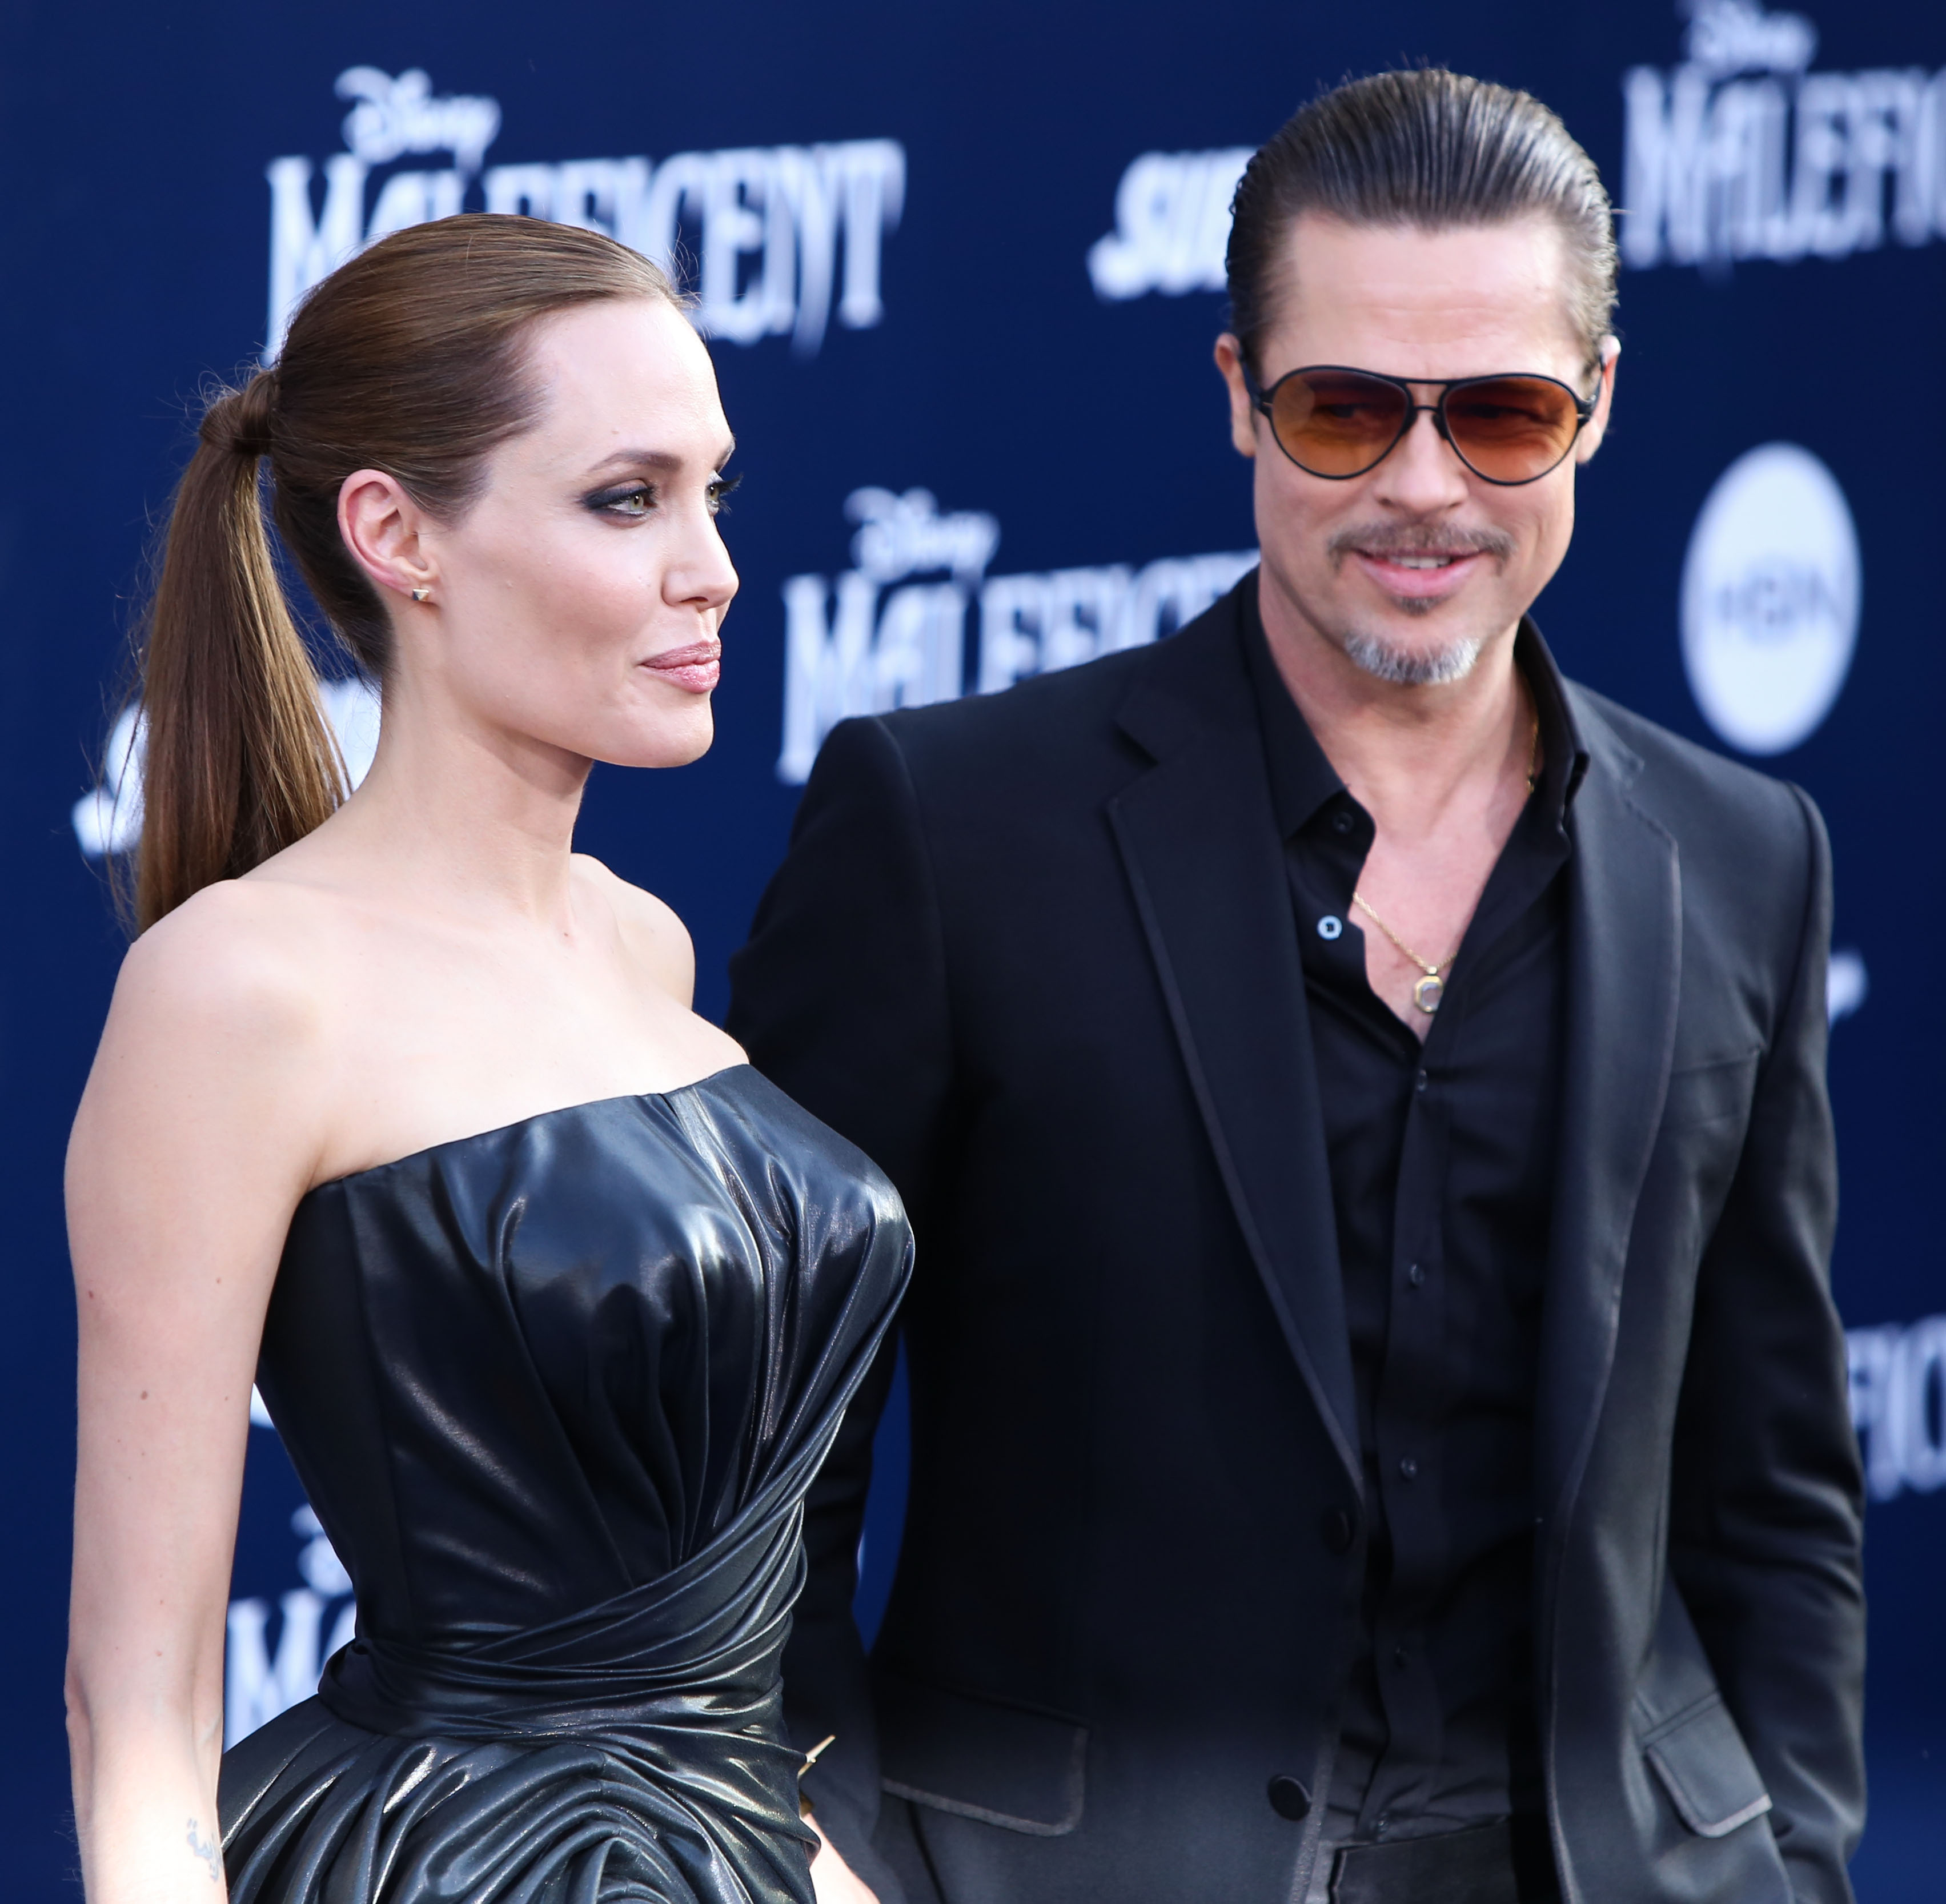 Actress Angelina Jolie and Actor Brad Pitt arrive at the World Premiere Of Disney's 'Maleficent' held at the El Capitan Theatre on May 28, 2014 in Hollywood, Los Angeles.